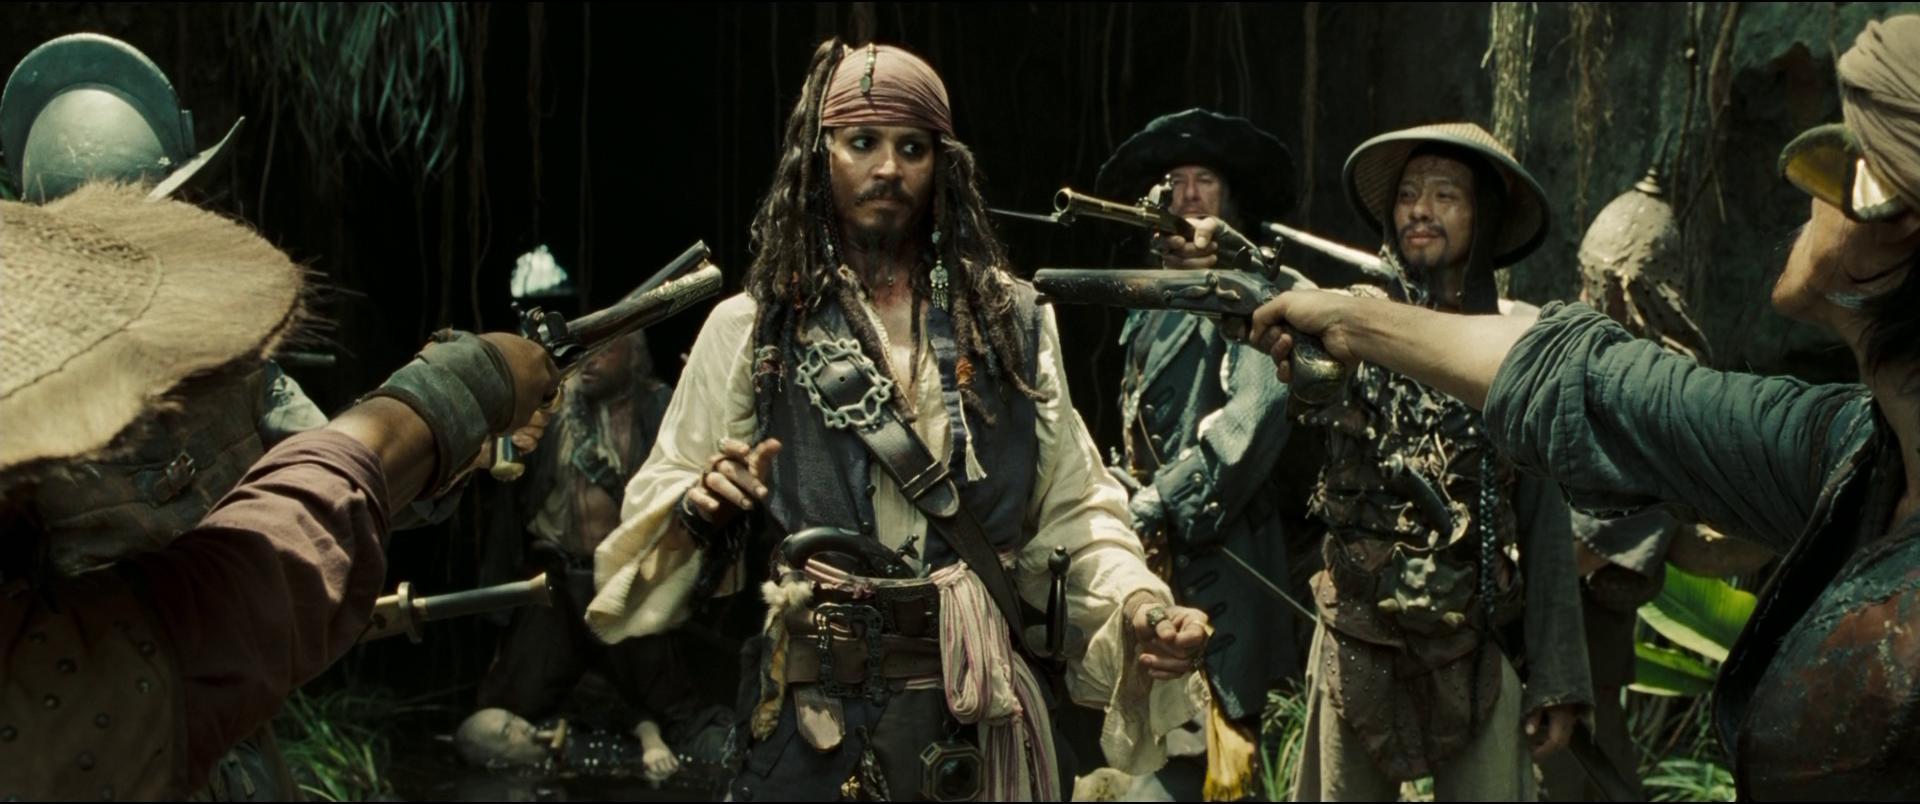 Pirates_of_the_Caribbean_At_World_s_End_AKA_Pirates_of_the_Caribbean_3-162810527-large.jpg